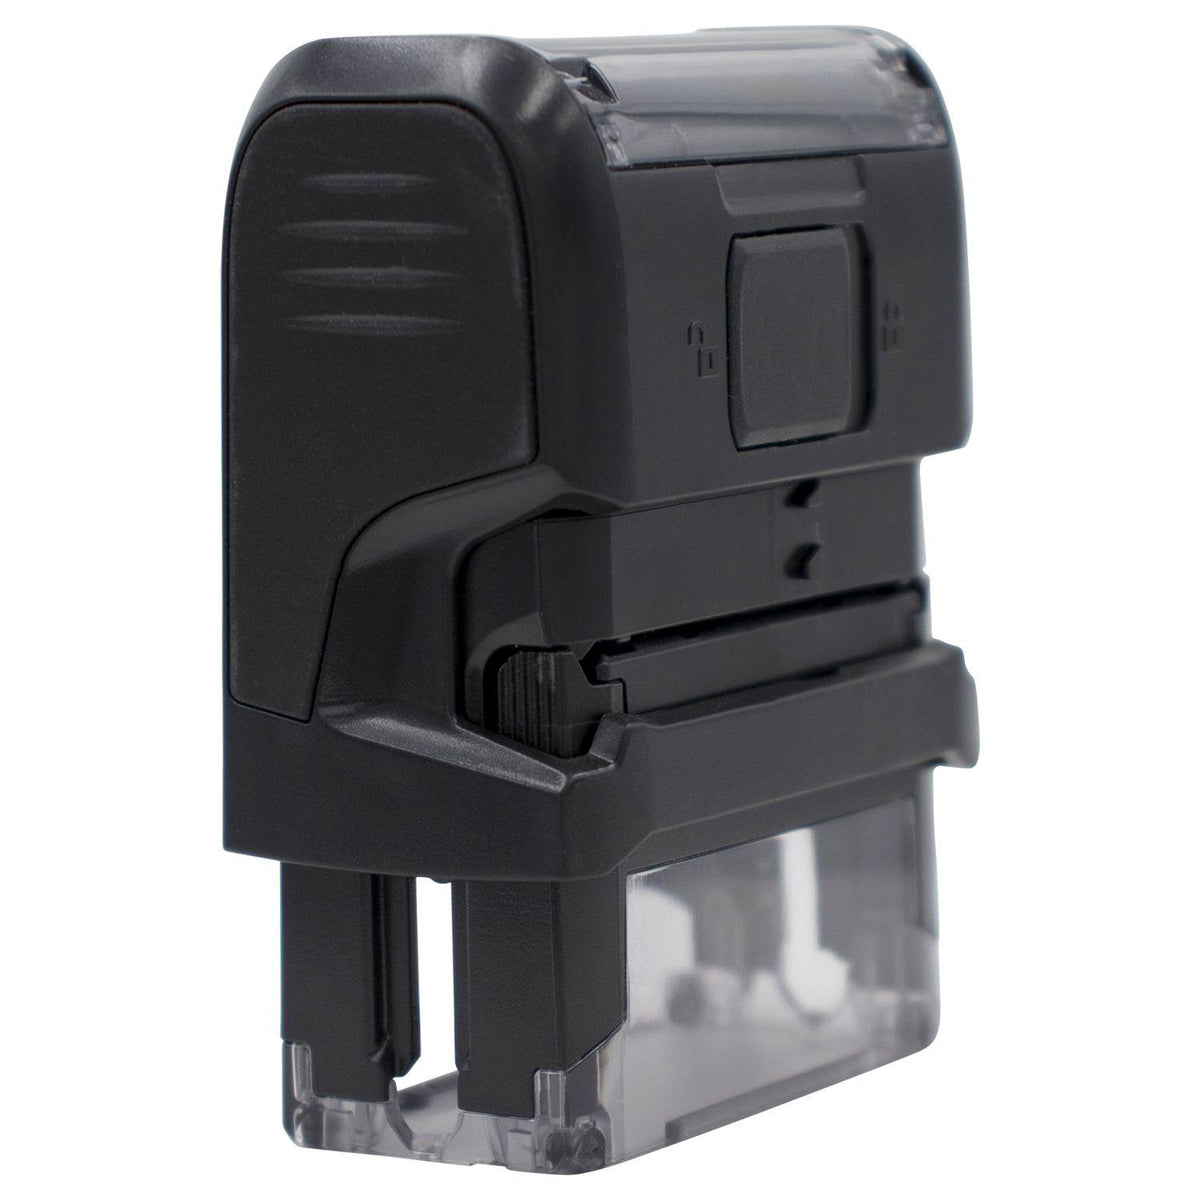 Self Inking Two Line Received Stamp - Engineer Seal Stamps - Brand_Trodat, Impression Size_Small, Stamp Type_Self-Inking Stamp, Type of Use_Office, Type of Use_Postal &amp; Mailing, Type of Use_Shipping &amp; Receiving